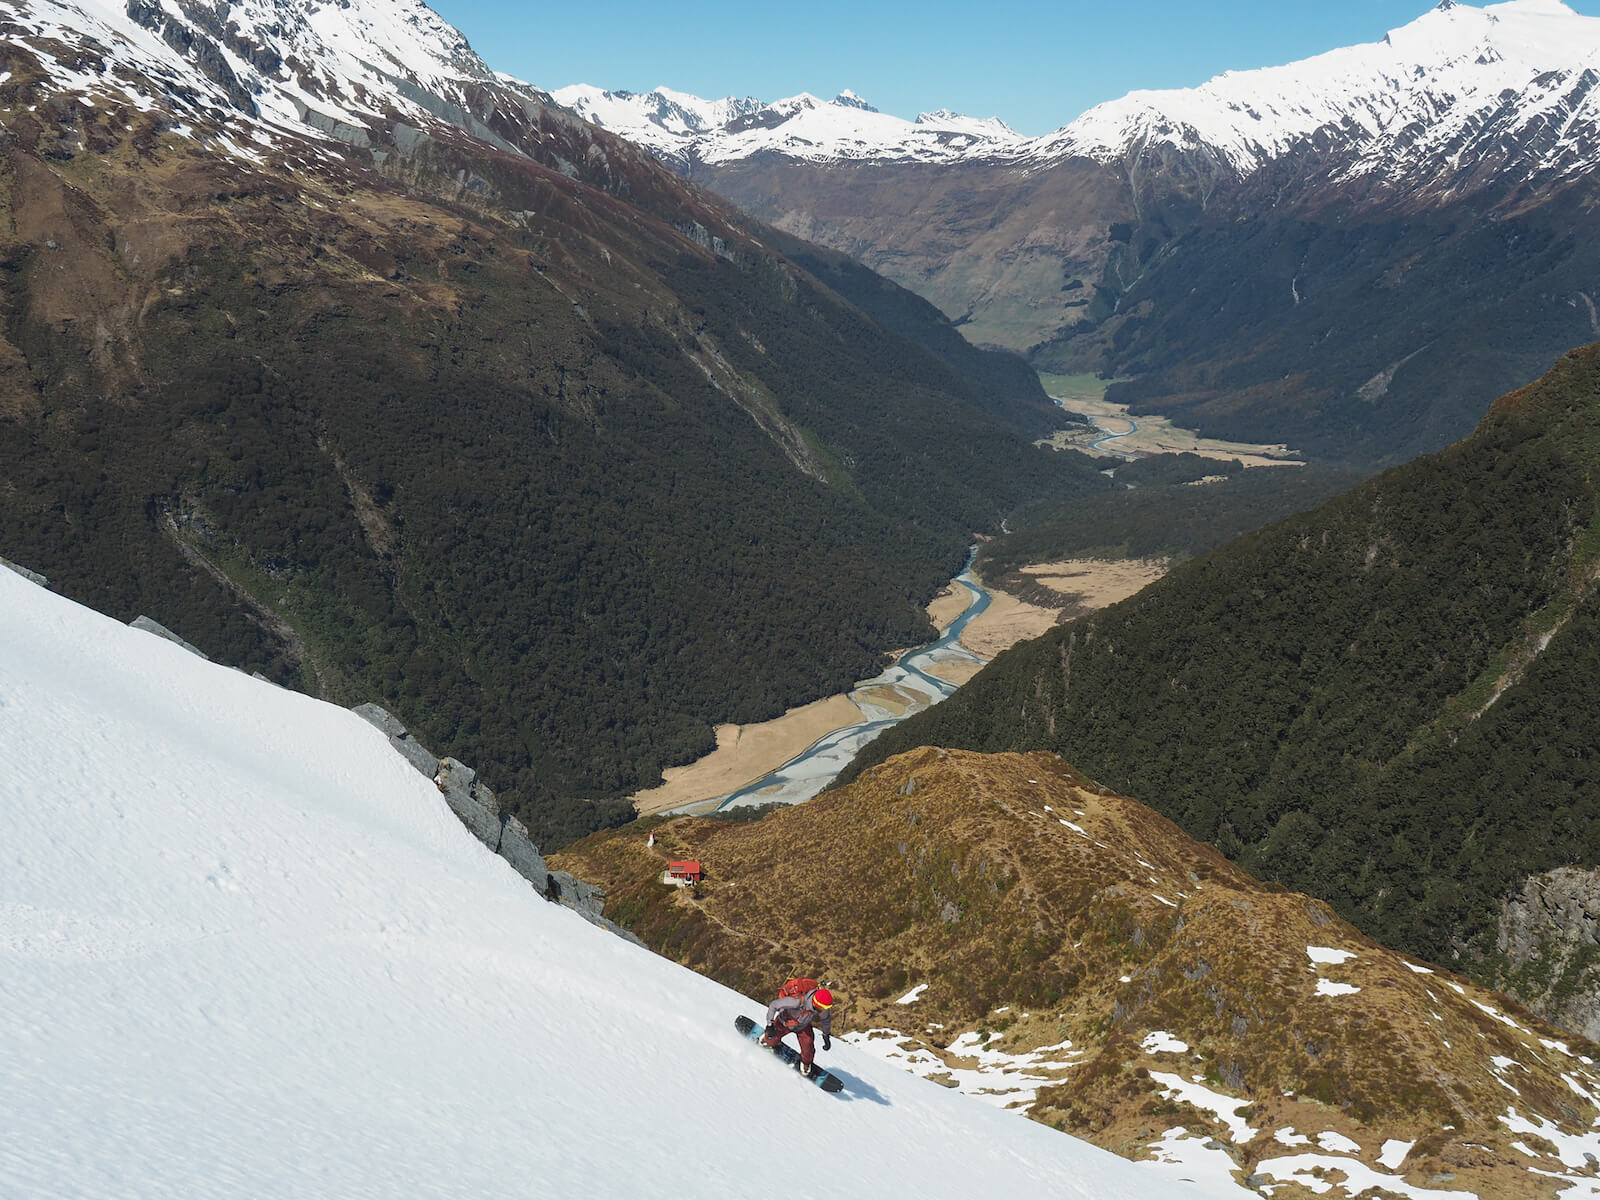 Snowboarding down near Mount Barff while ski touring in New Zealand up the Aspiring Valley